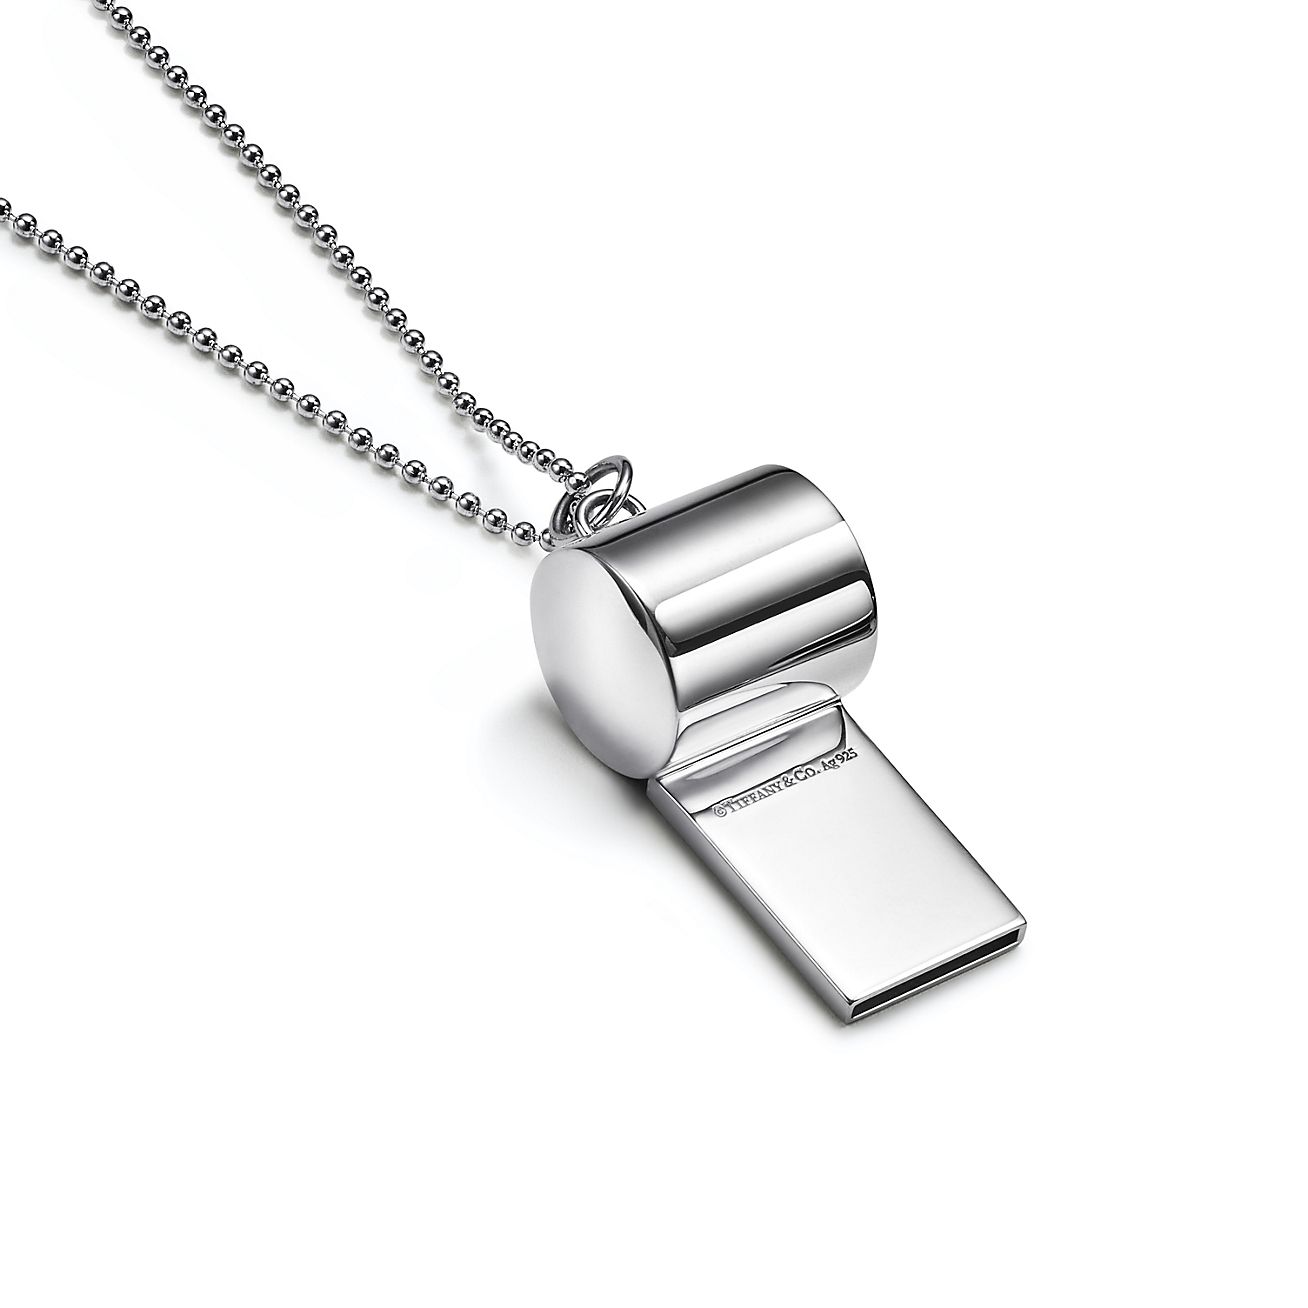 Nike/Tiffany Whistle Pendant in Sterling Silver | Tiffany & Co.